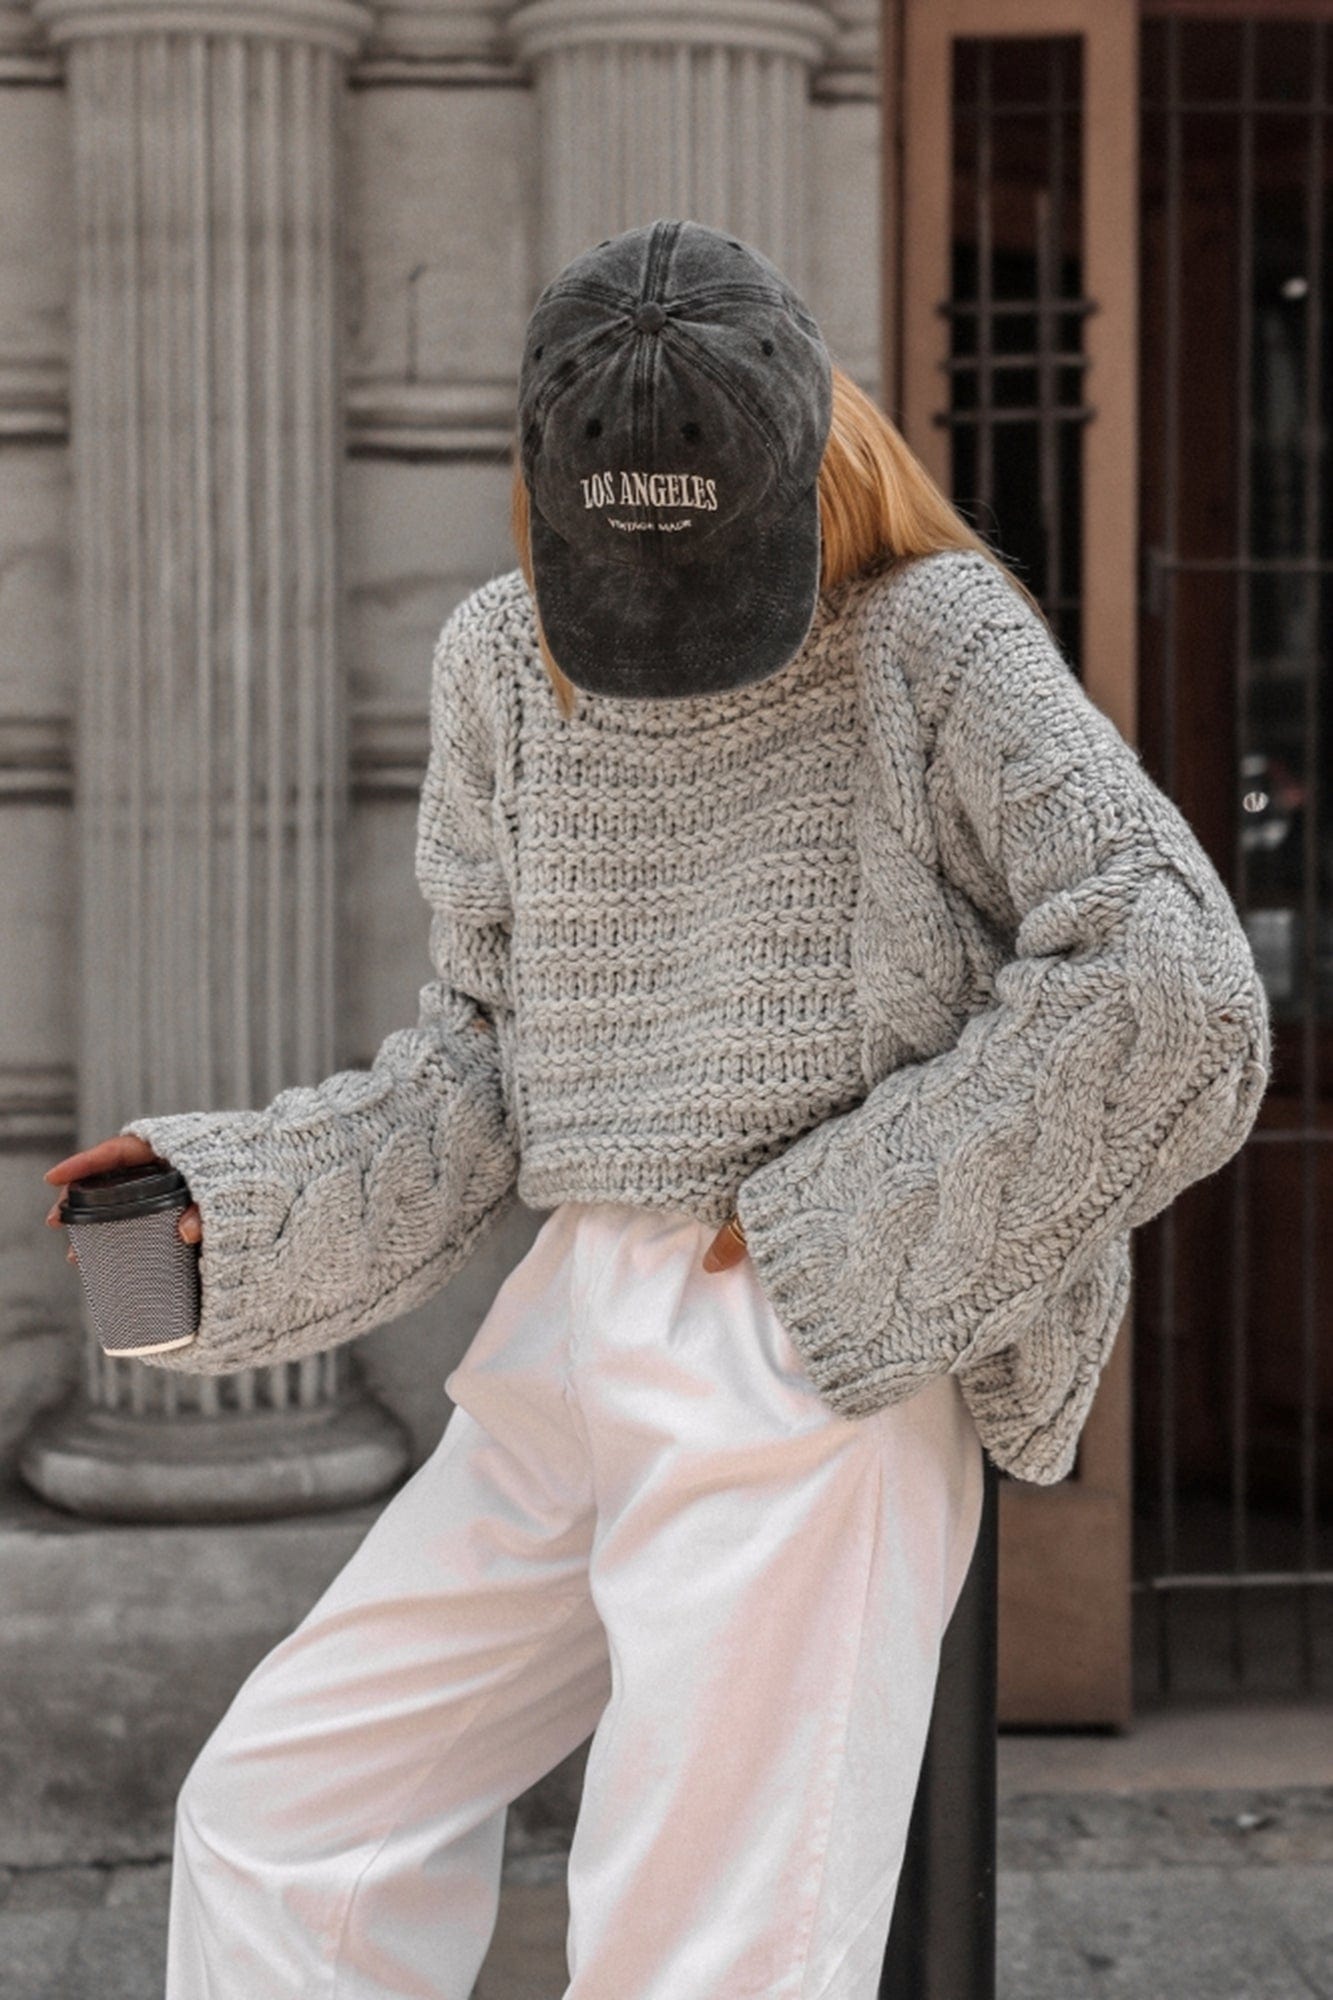 Trend Collection Pullover mit Zopfmuster One Size / Grau